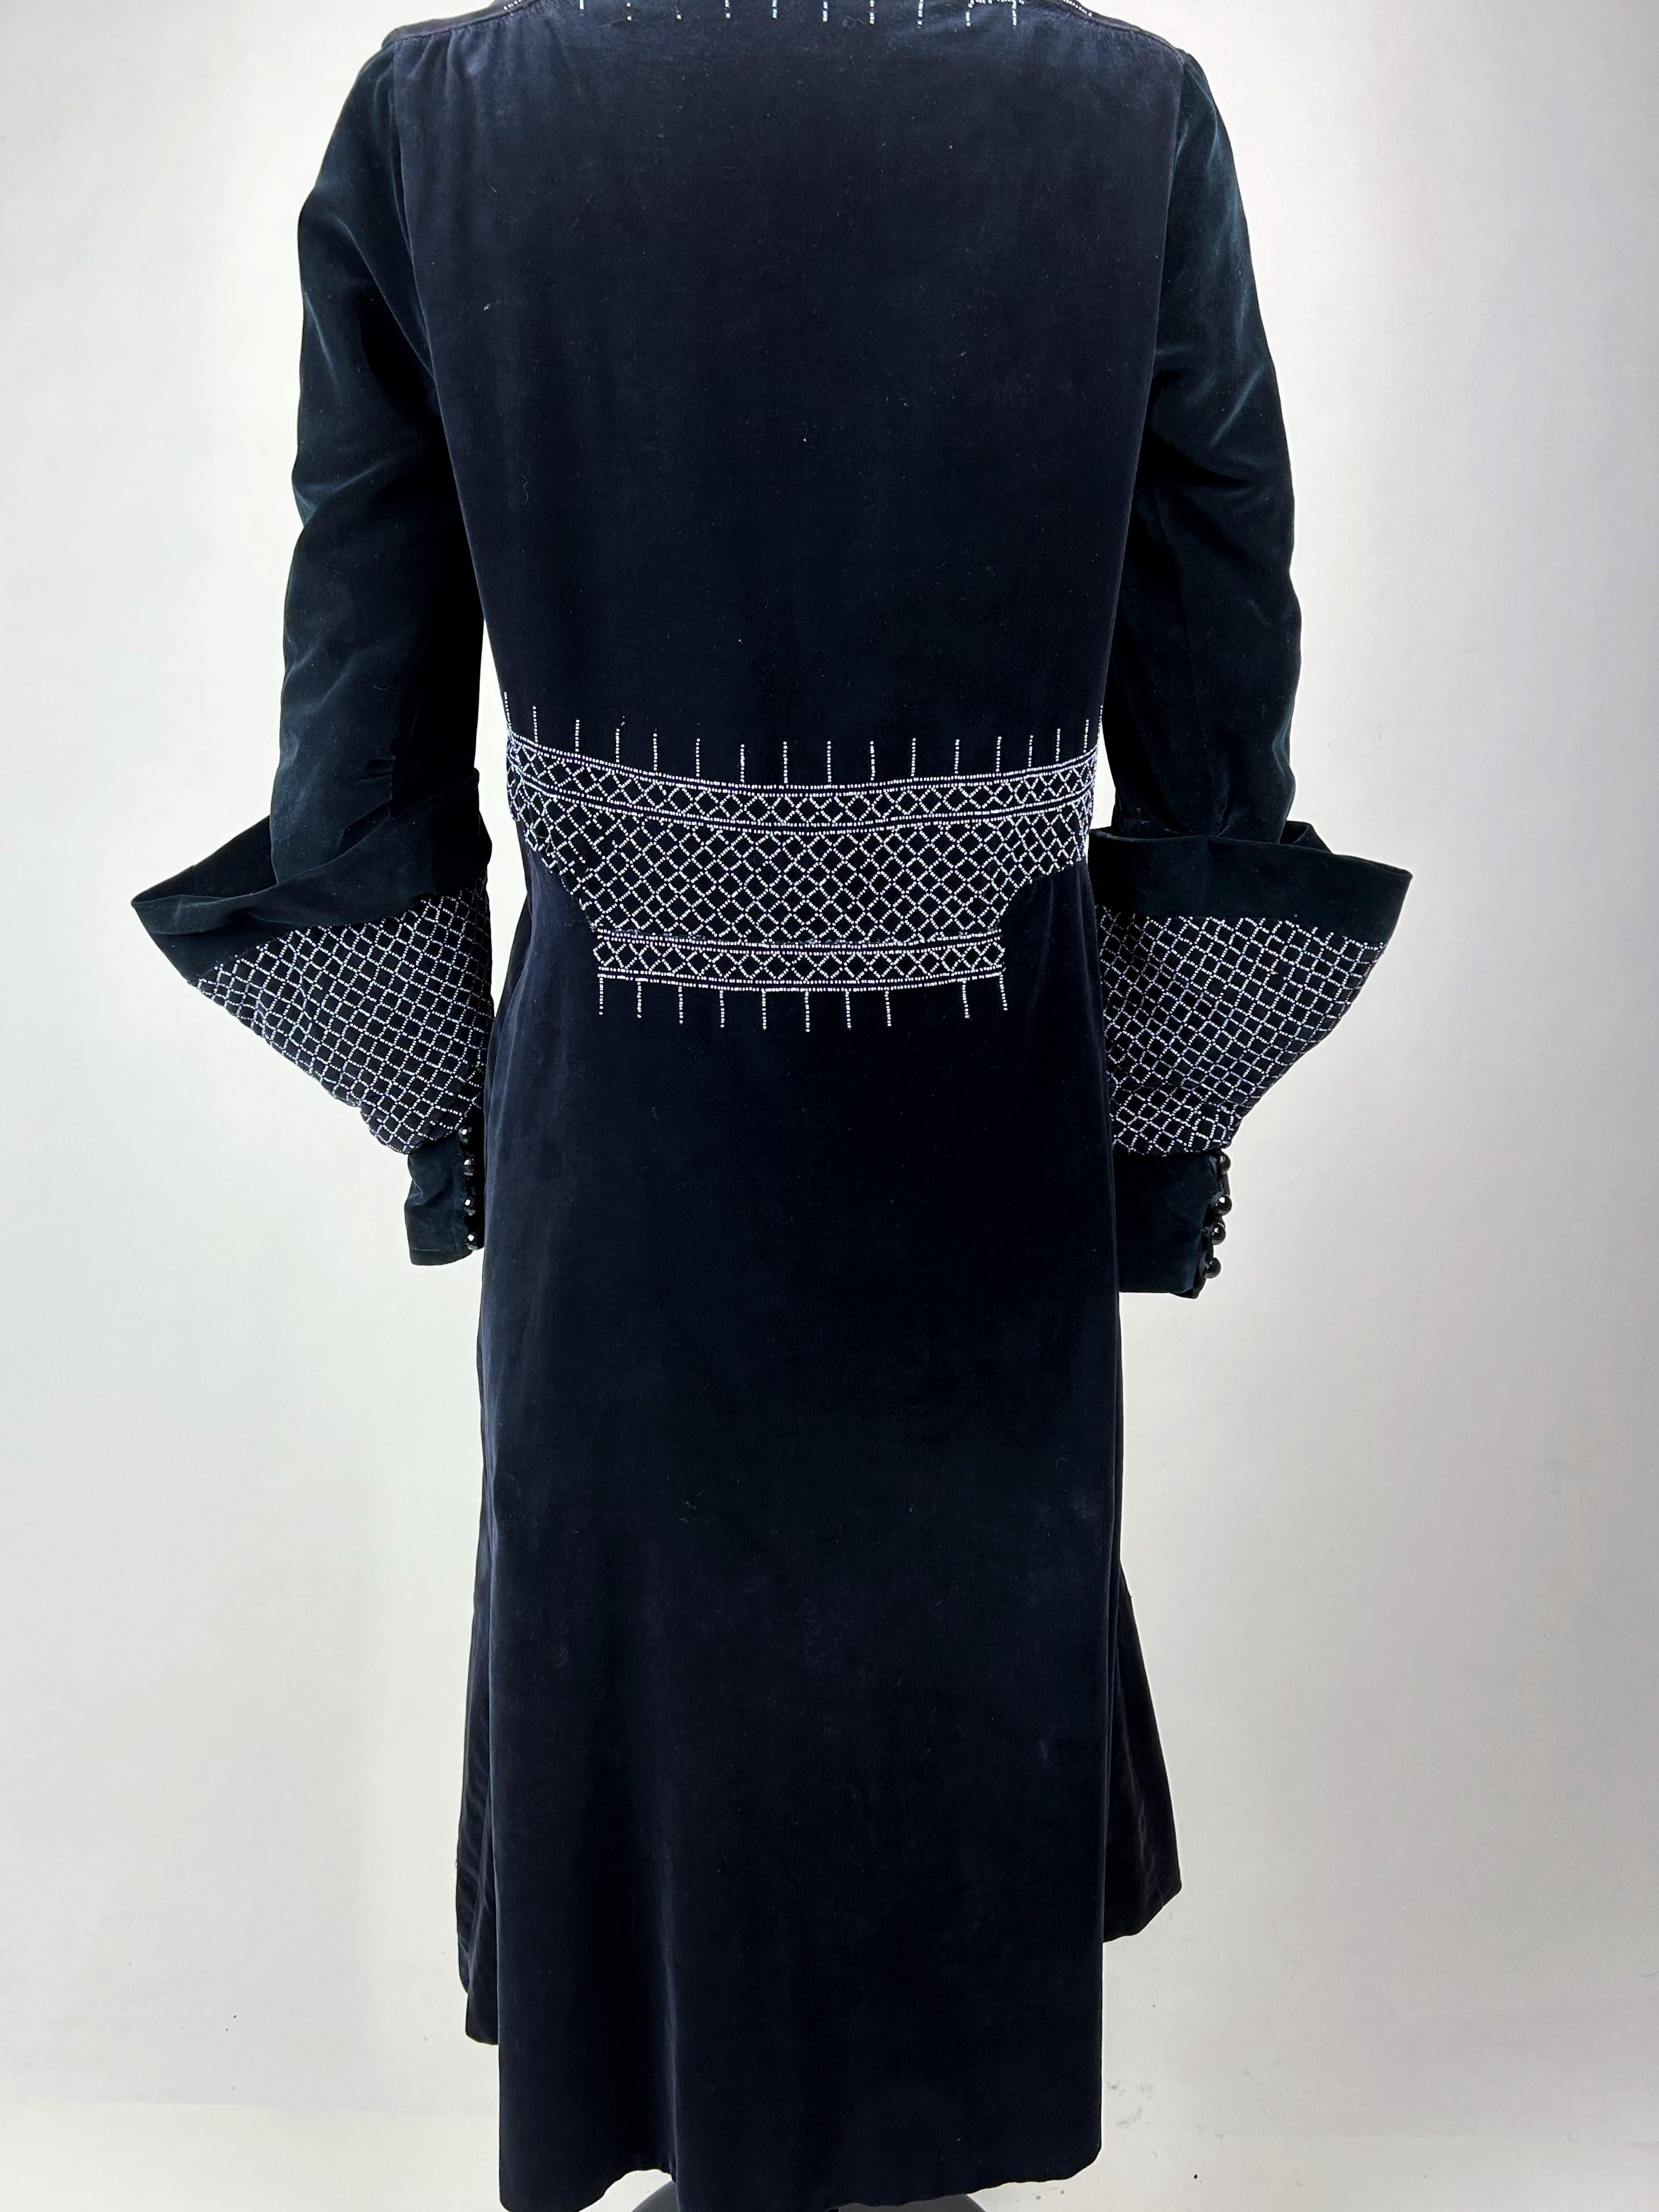 A Navy Velvet Sac Dress with glass beads embroideries - France Circa 1925-1930 For Sale 9